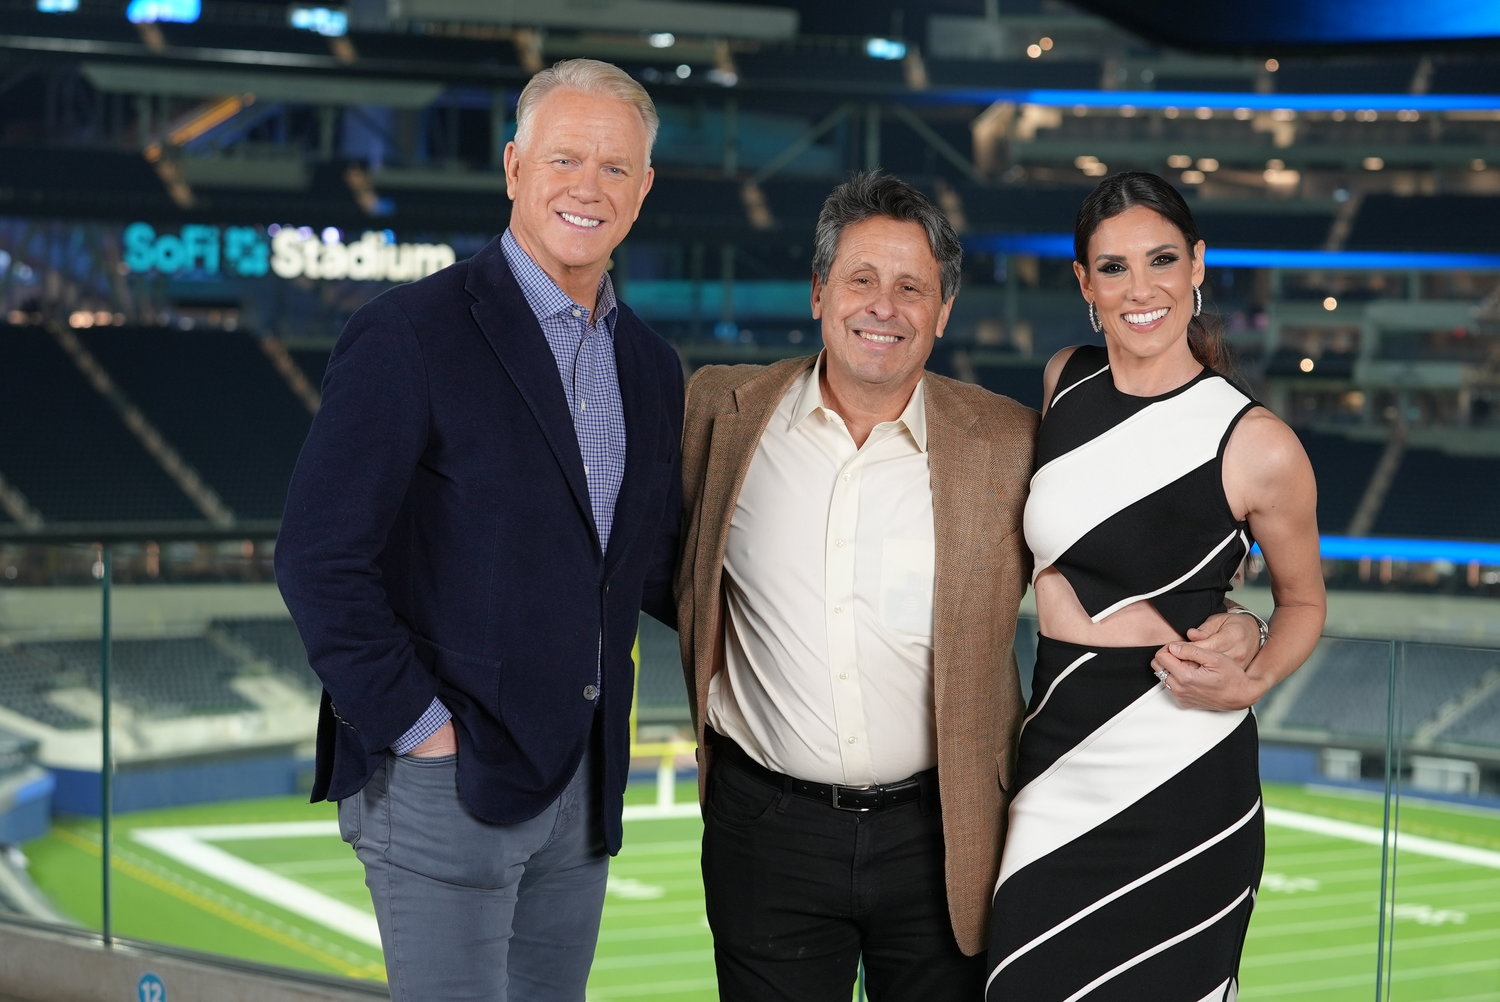 Boomer Esiason, analyst for CBS Sports’ “The NFL Today,” left, with Robert Horowitz, executive producer for Newtown-based Juma Entertainment, and Daniela Ruah, star of CBS’s “NCIS: Los Angeles,” during the filming of “Super Bowl Greatest Commercials: Battle of the Decades” at SoFi Stadium in Los Angeles.